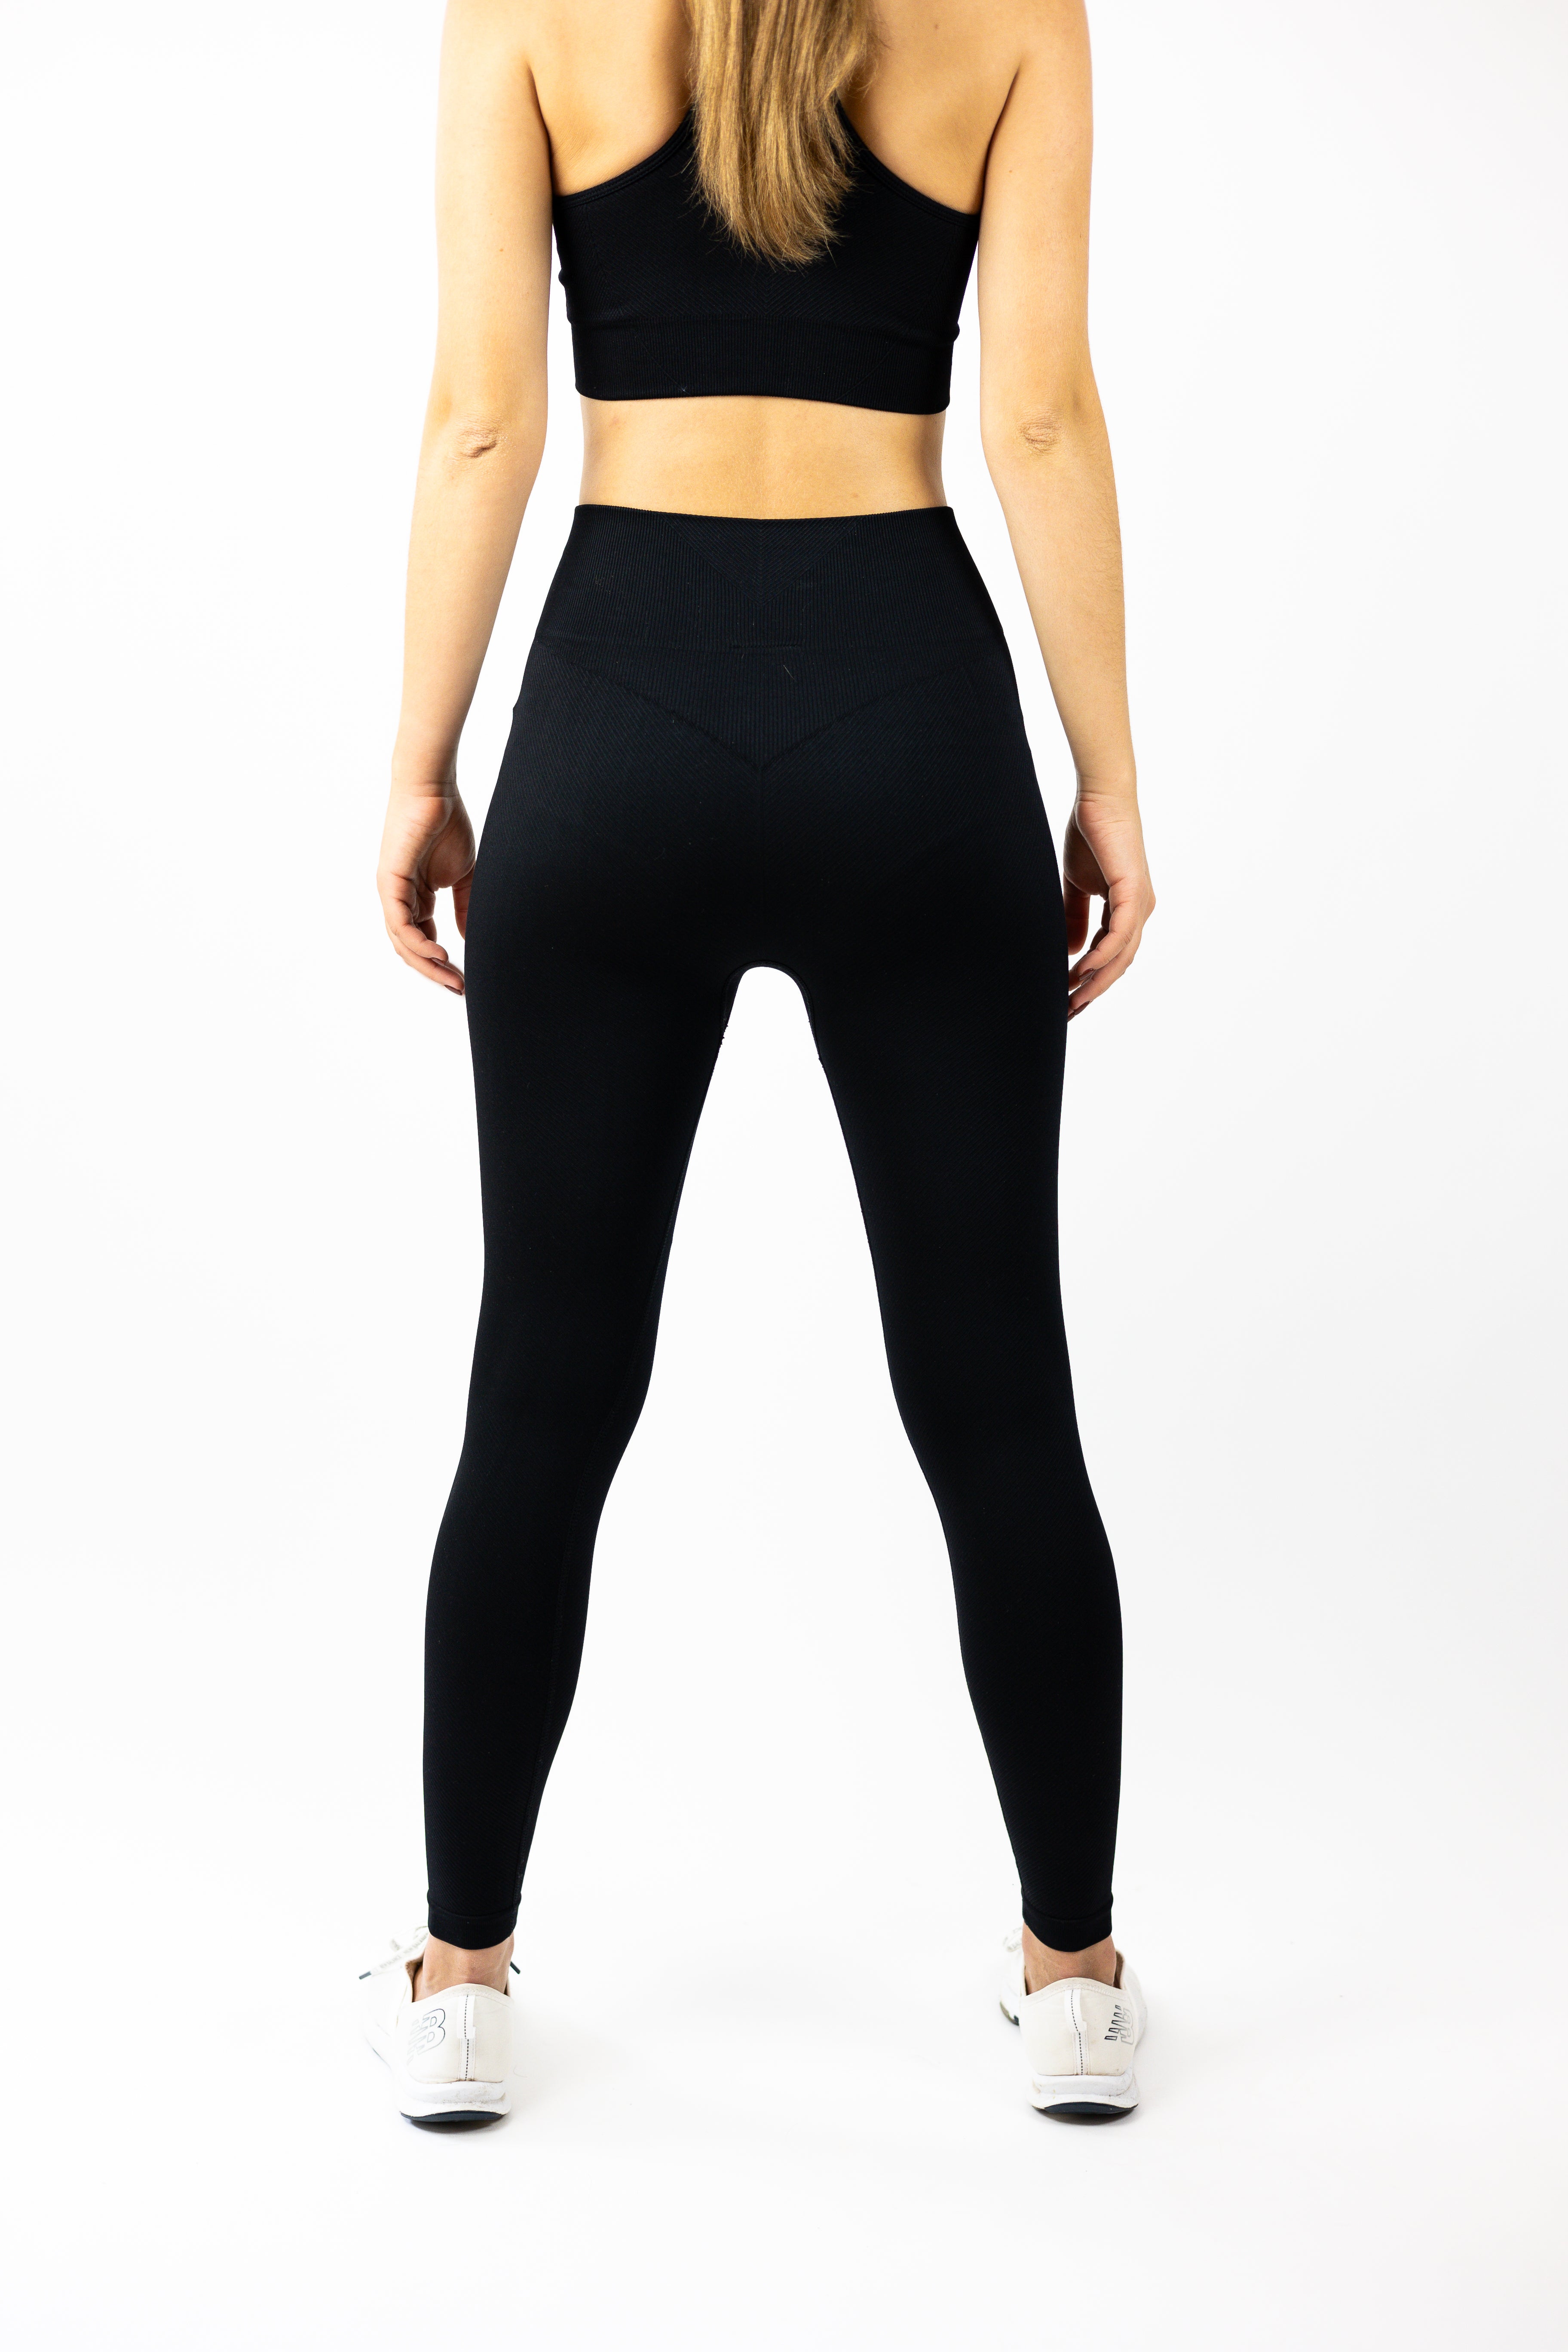 rear view of woman modeling Strength of One black leggings